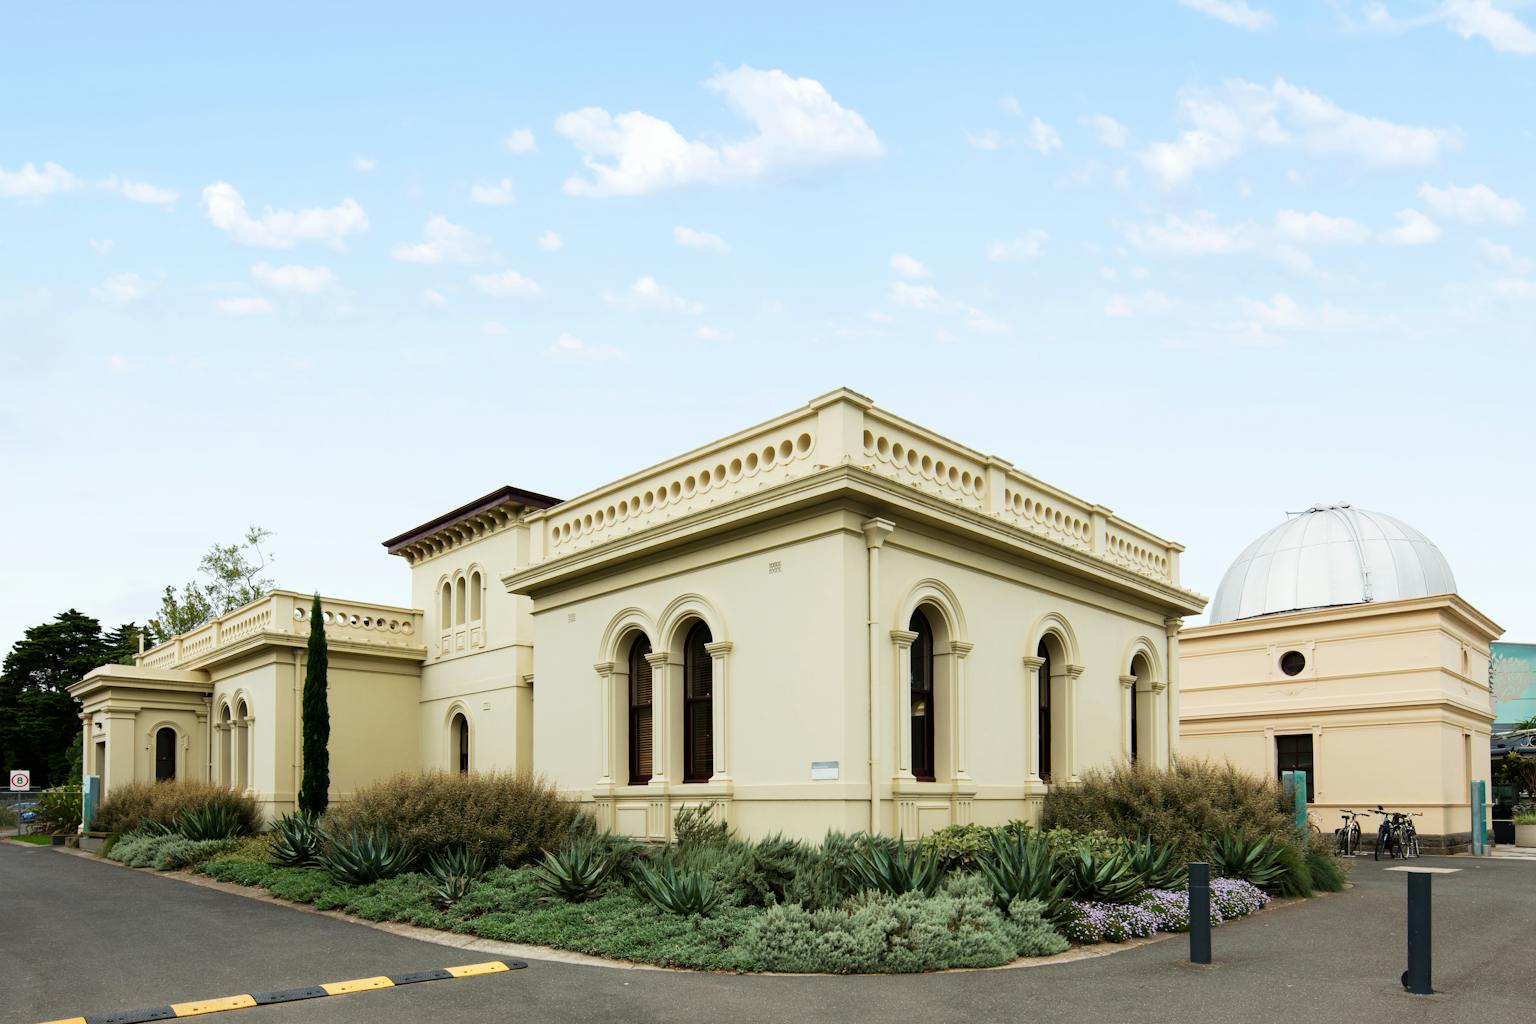 Royal Botanic Gardens Victoria, which Purcell has provided heritage consultancy services to